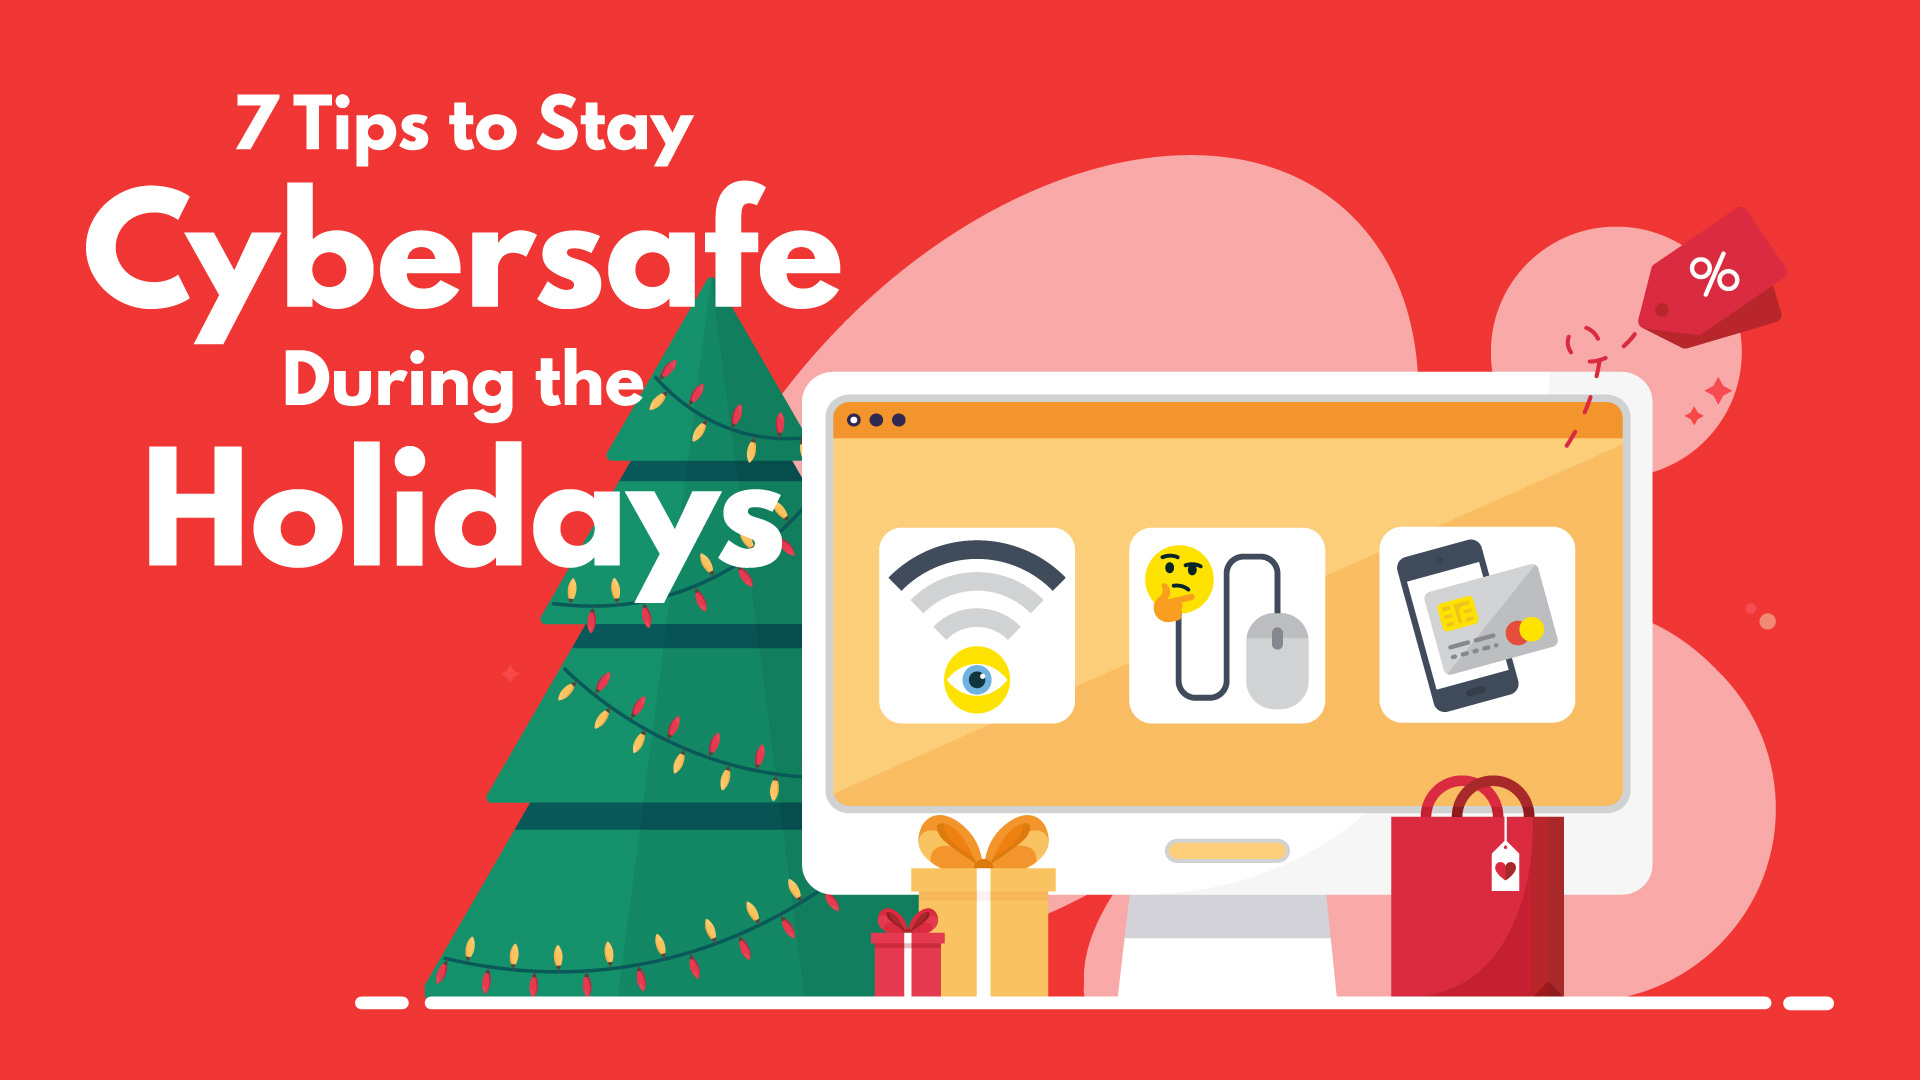 7 Tips to Stay Cybersafe during the Holidays